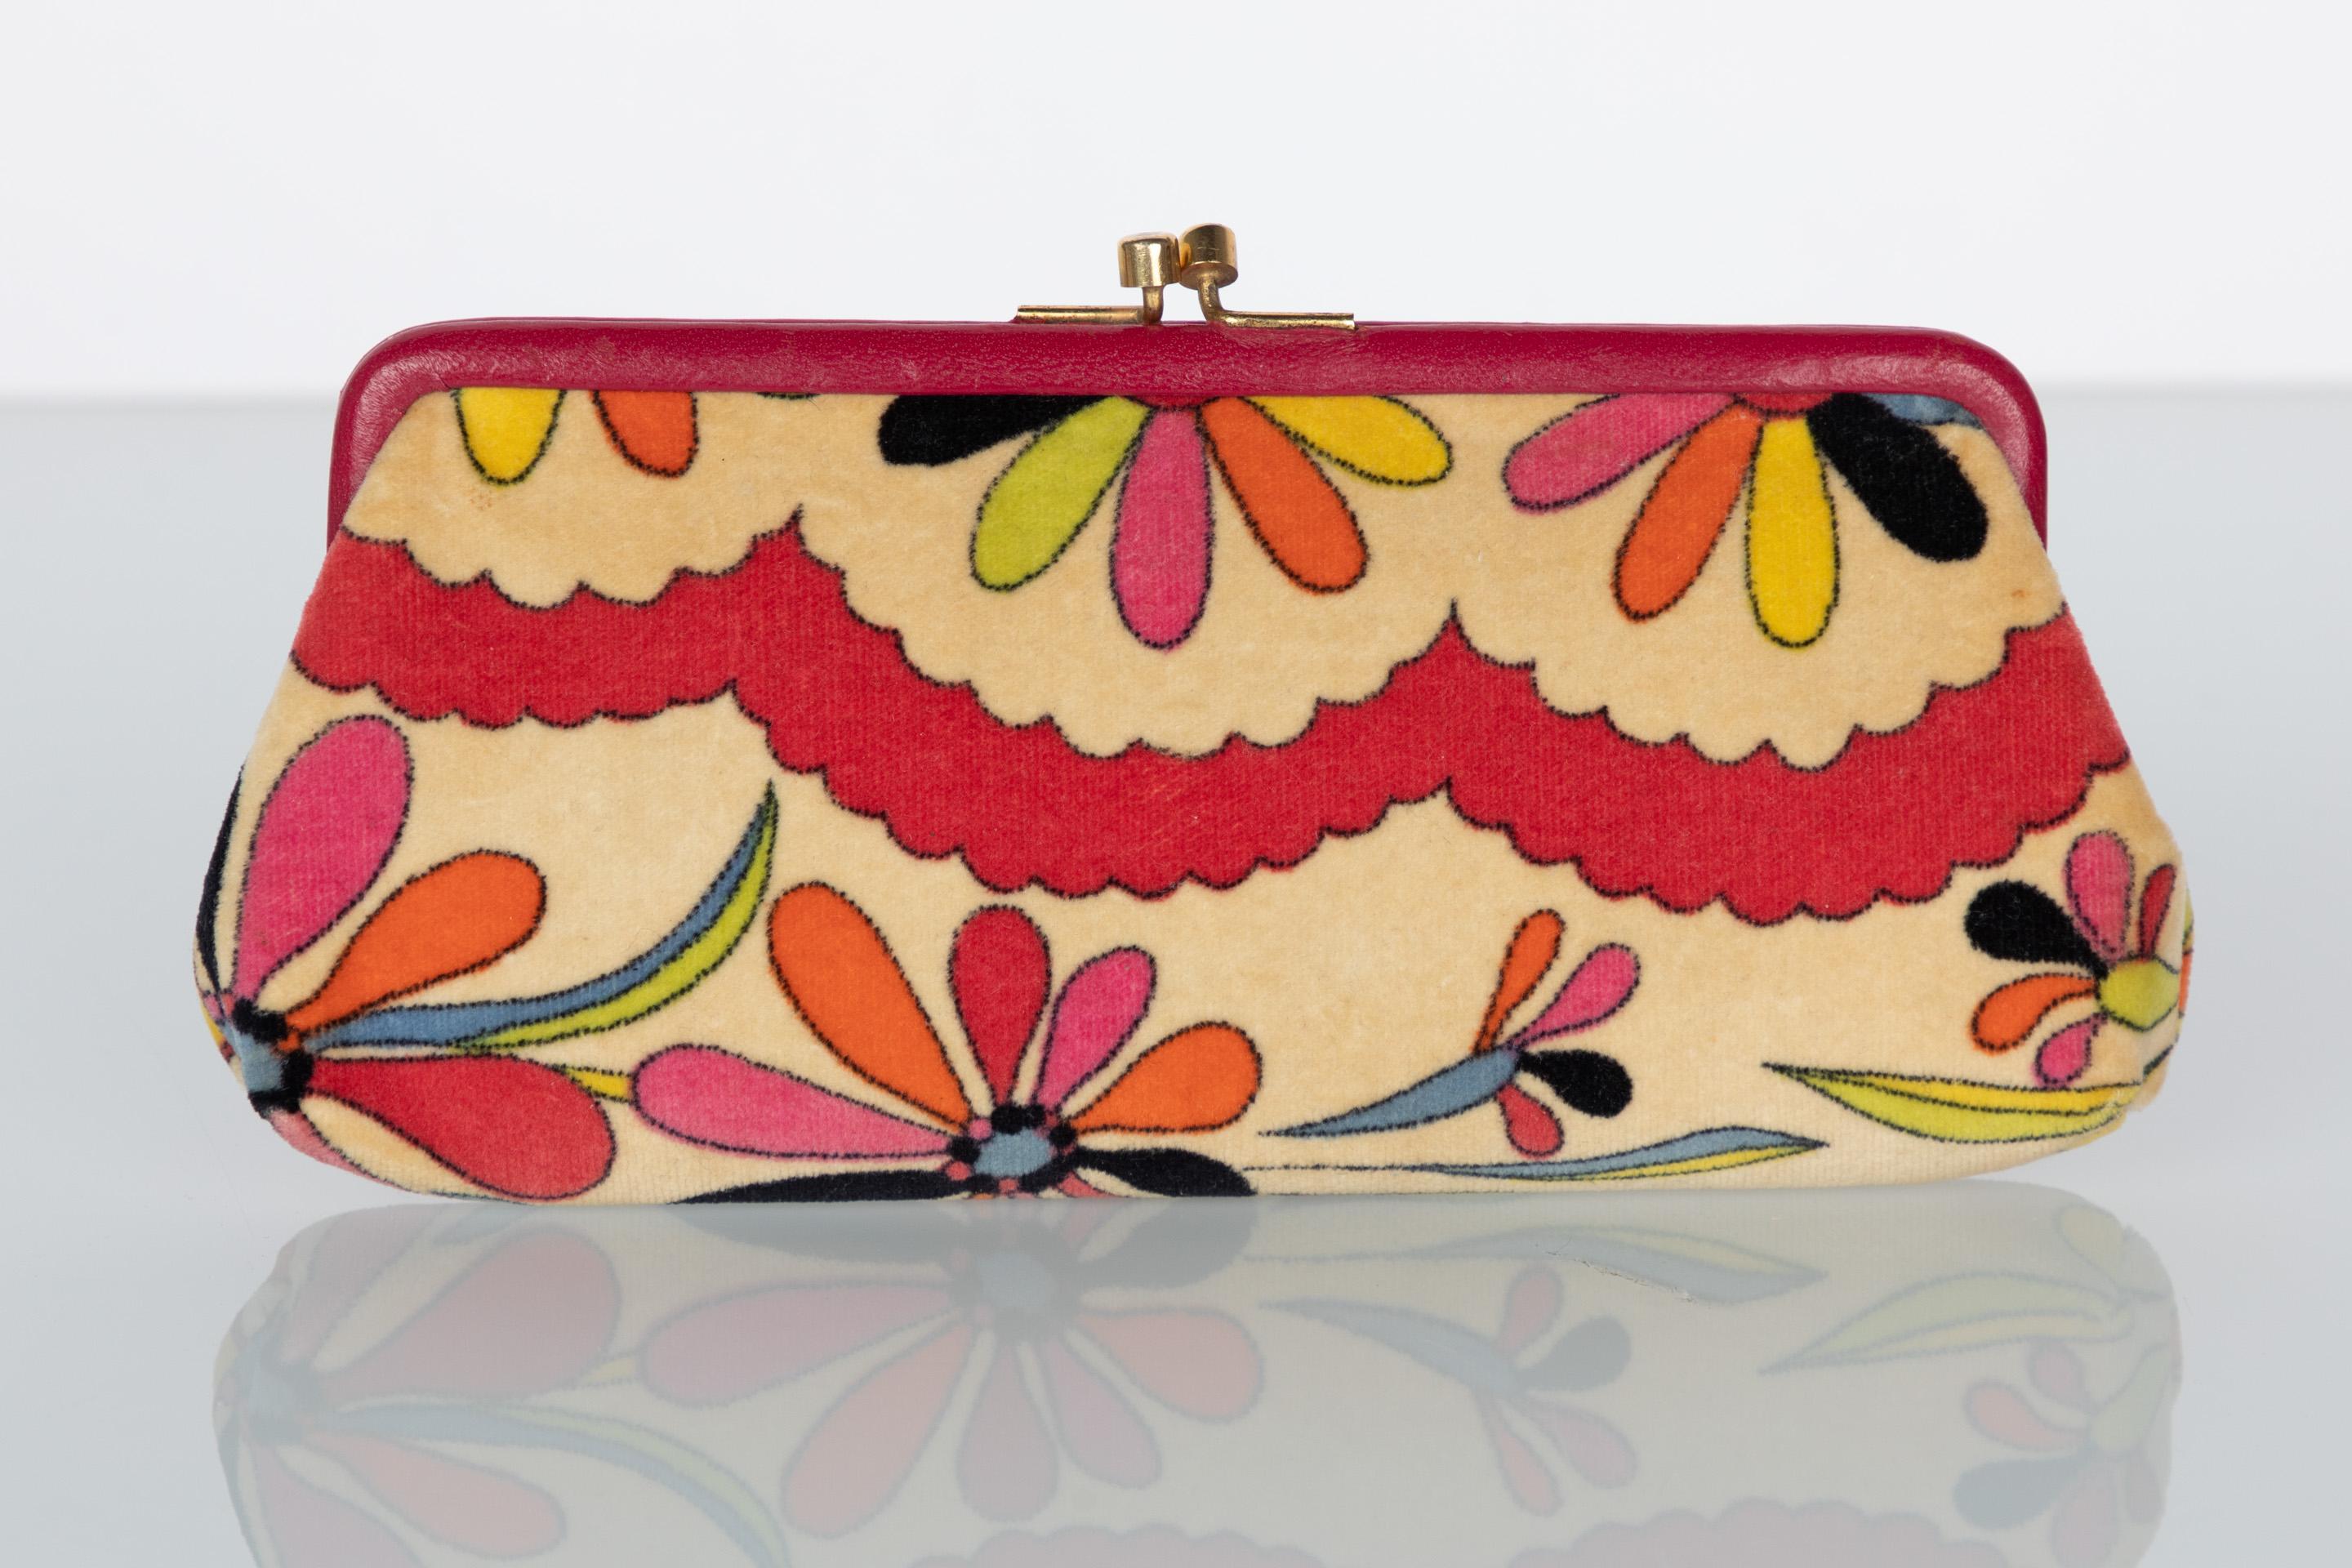 An Emilio Pucci design is easily recognizable for its vibrant and novel prints. Through these colorful prints, Pucci channels a youthful energy overflowing with 60s charm. Done in a buff velvet, this circa 1967 Pucci clutch features a stylized